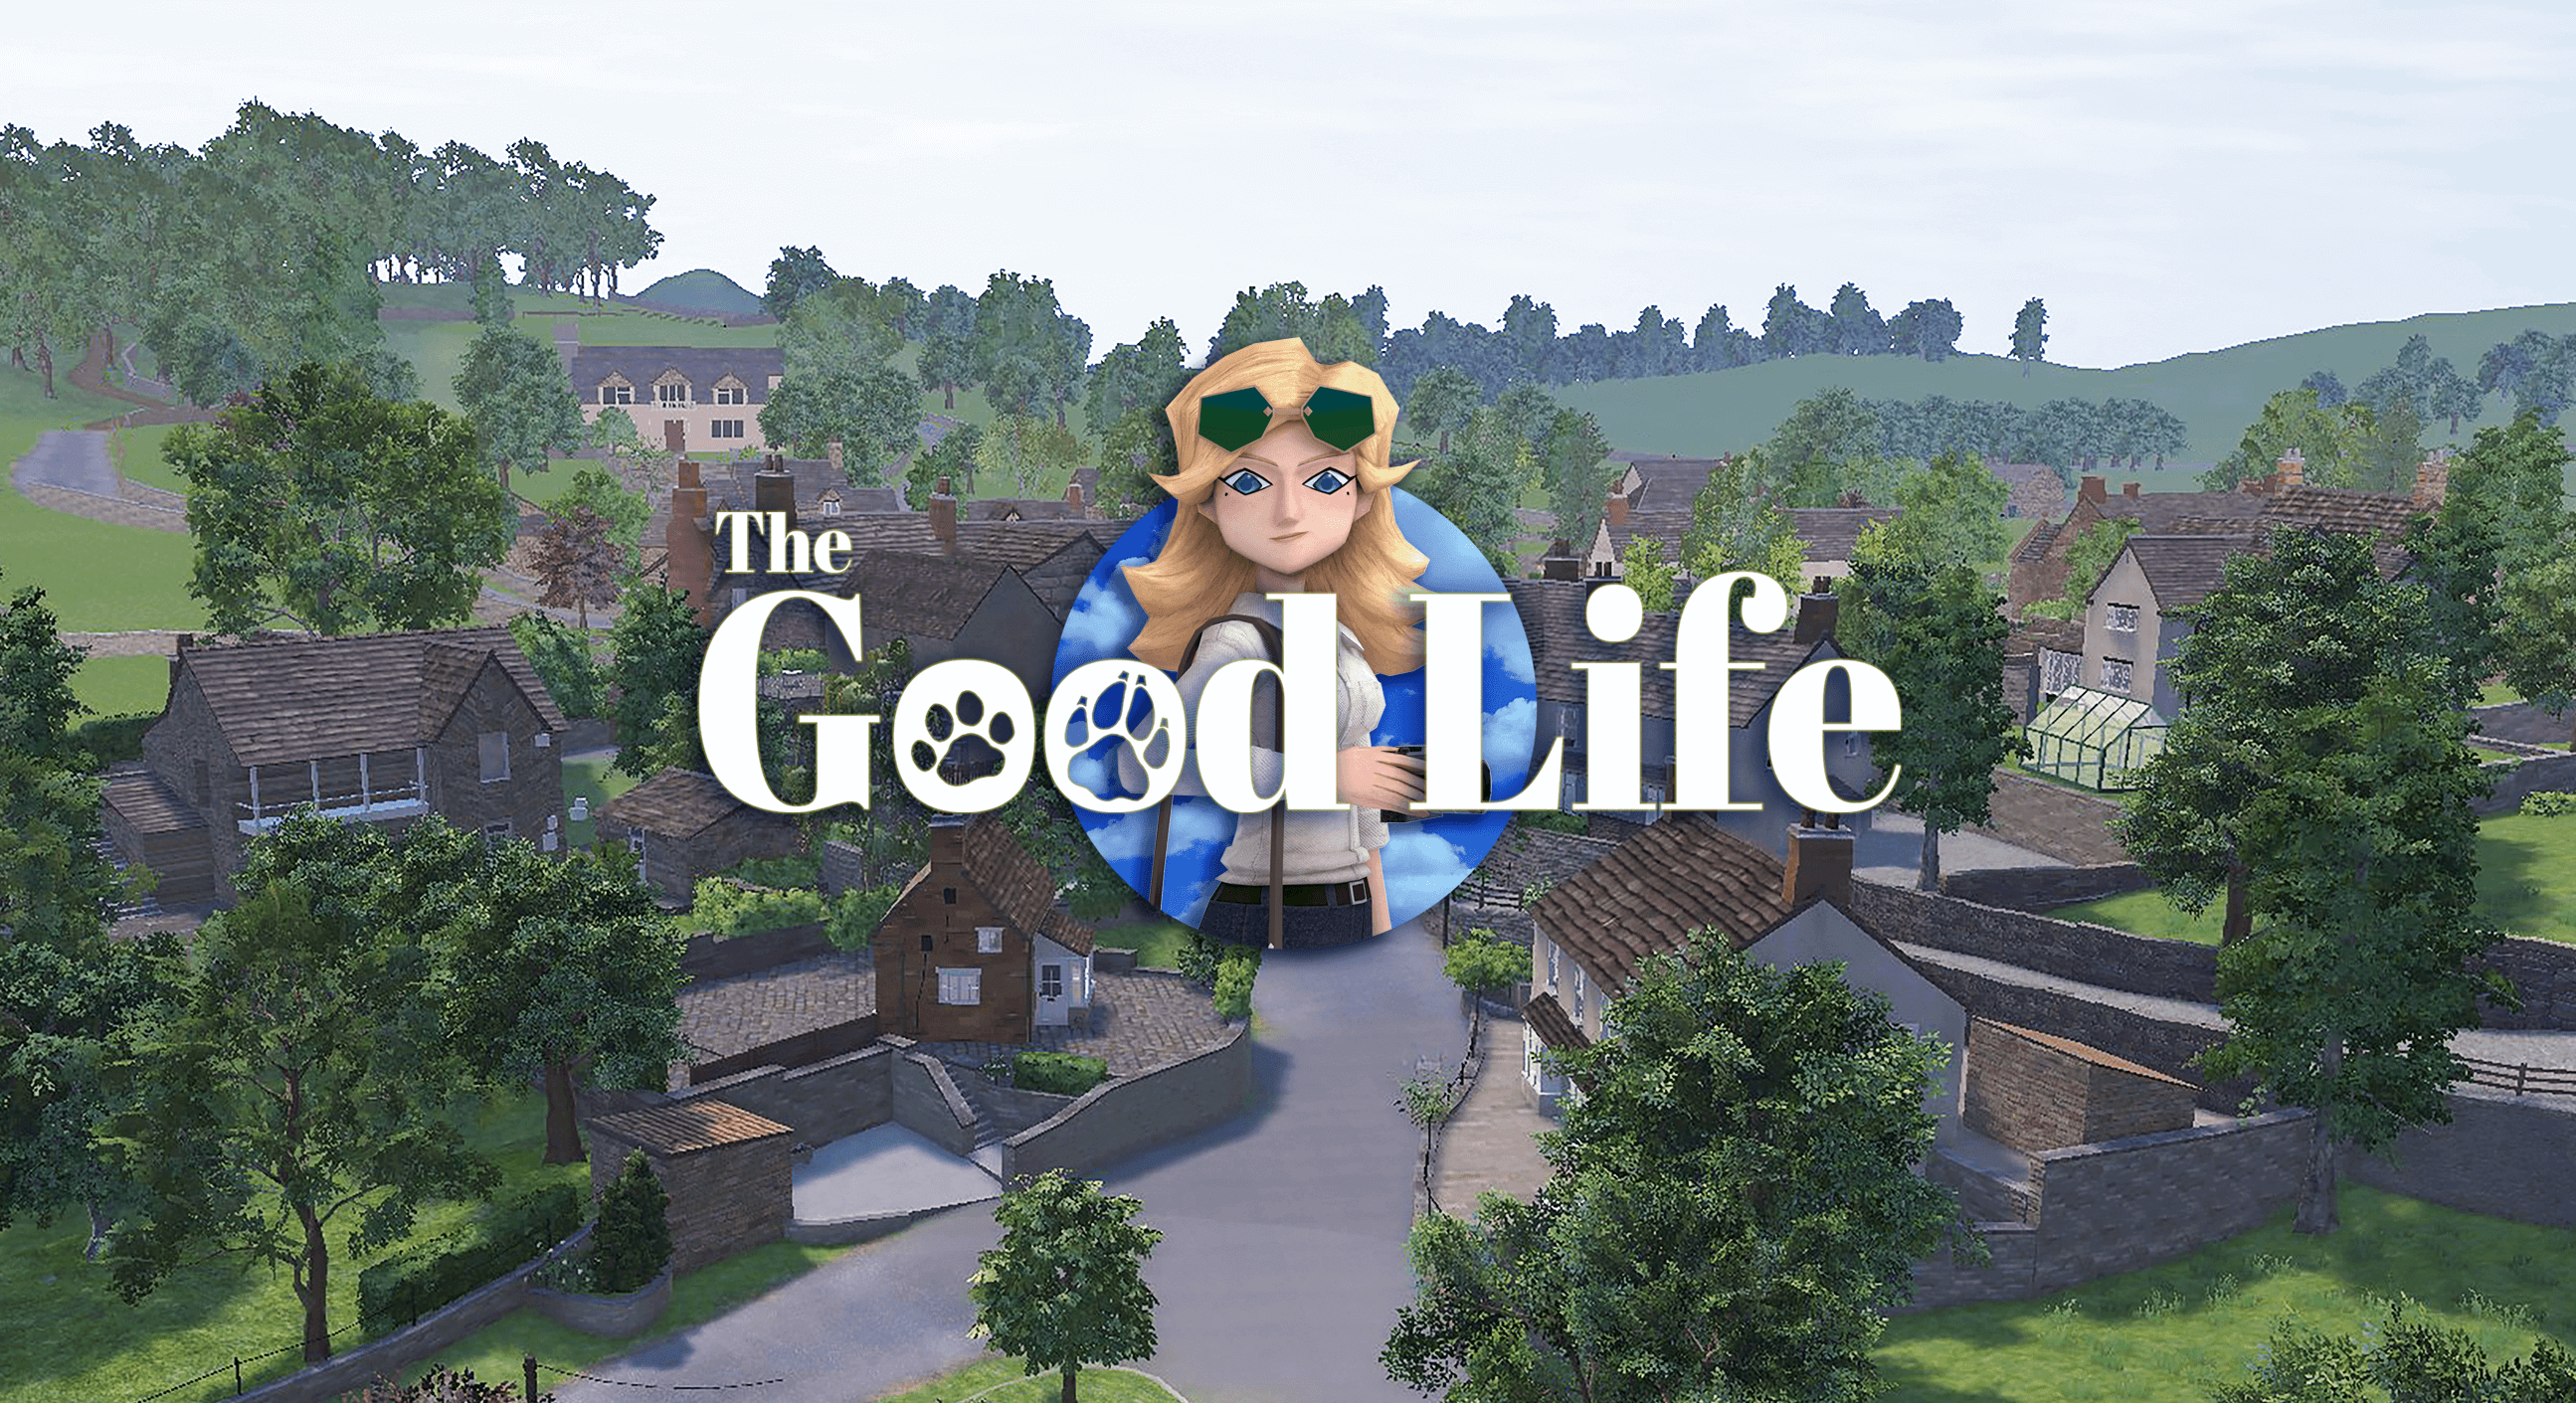 The good life found